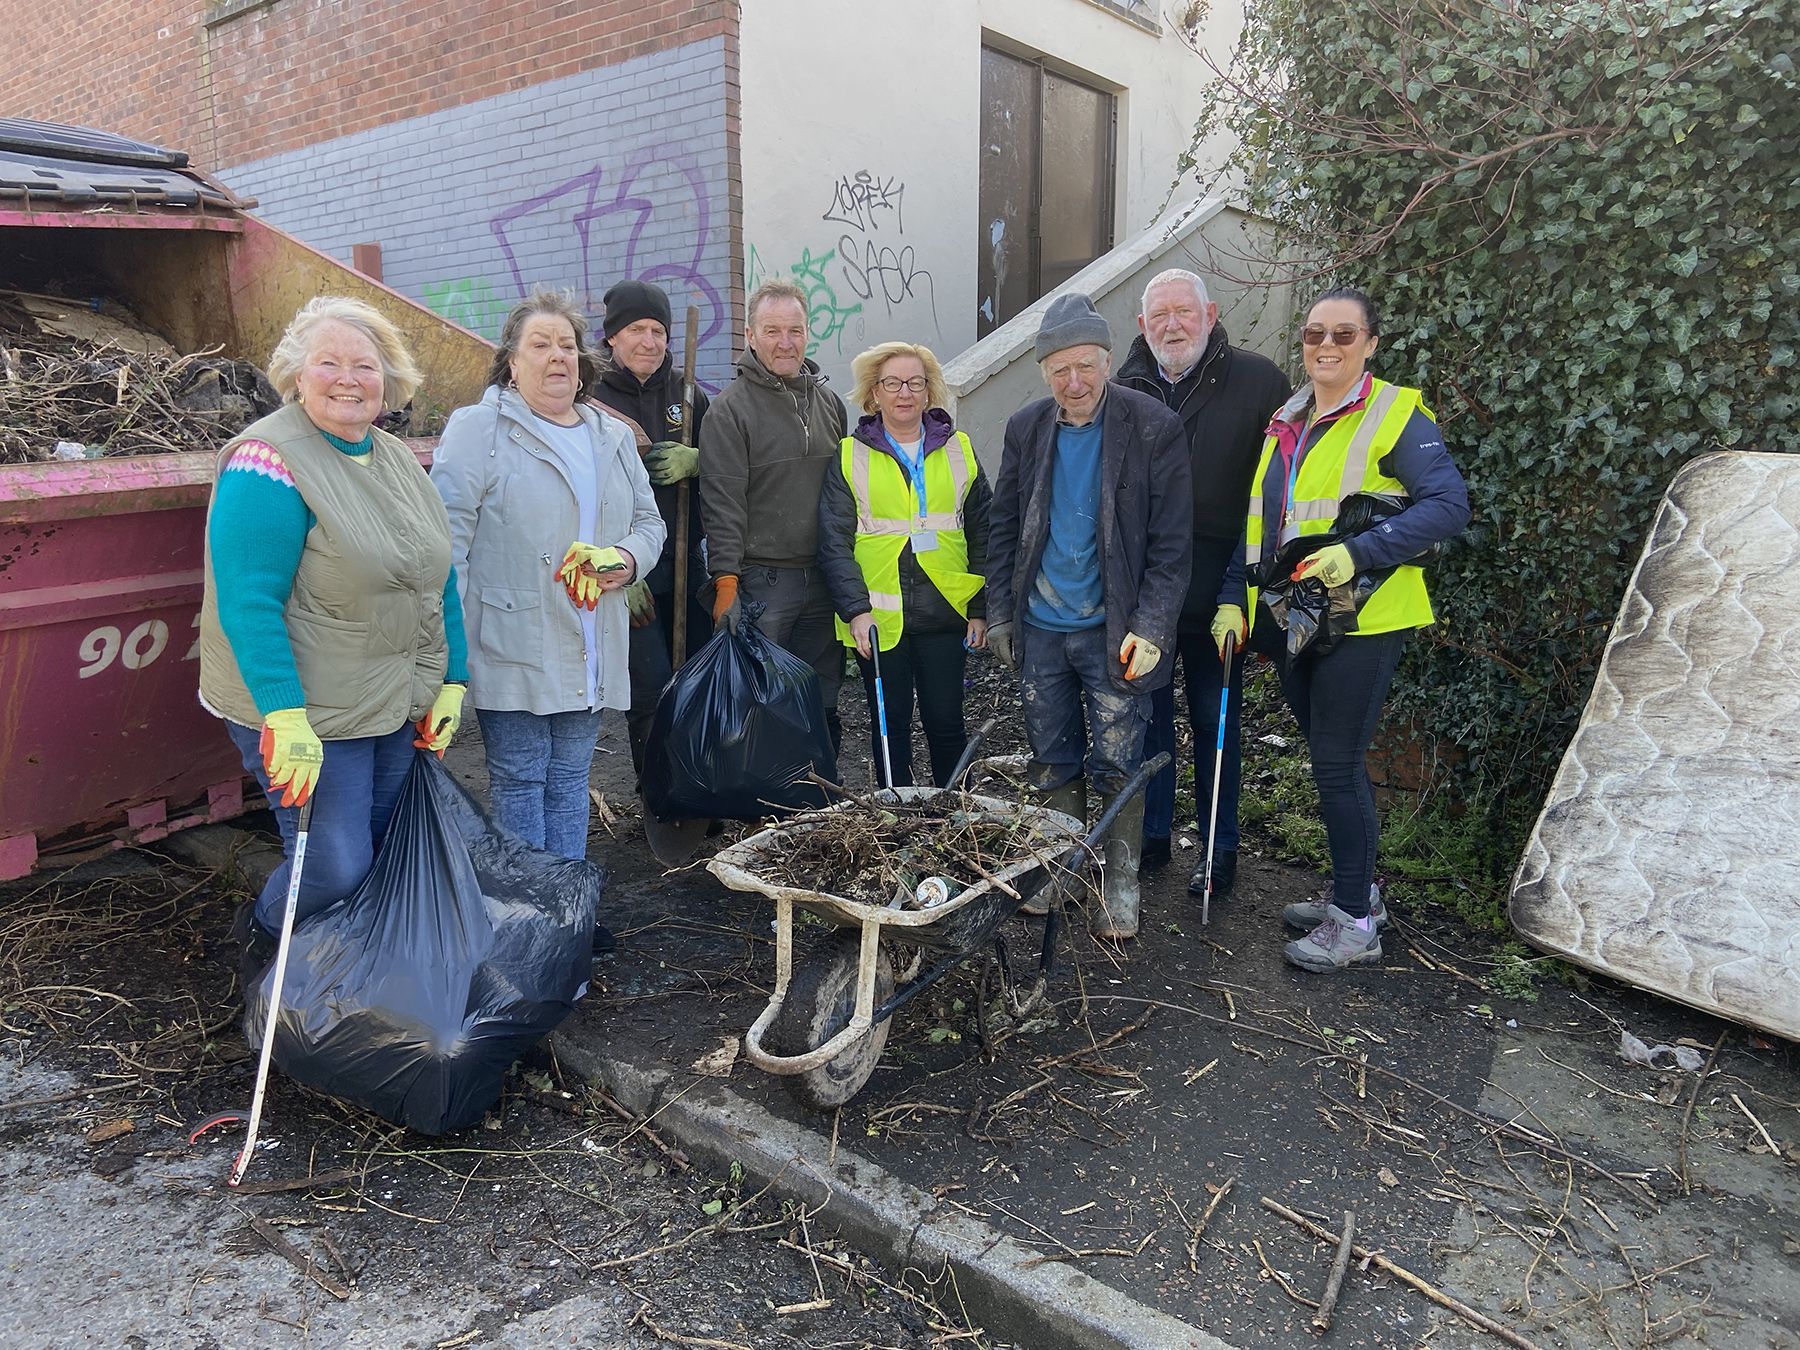 CLEAN-UP: The team helped spruce up the Thorndale, Duncairn and Kinnaird areas of North Belfast